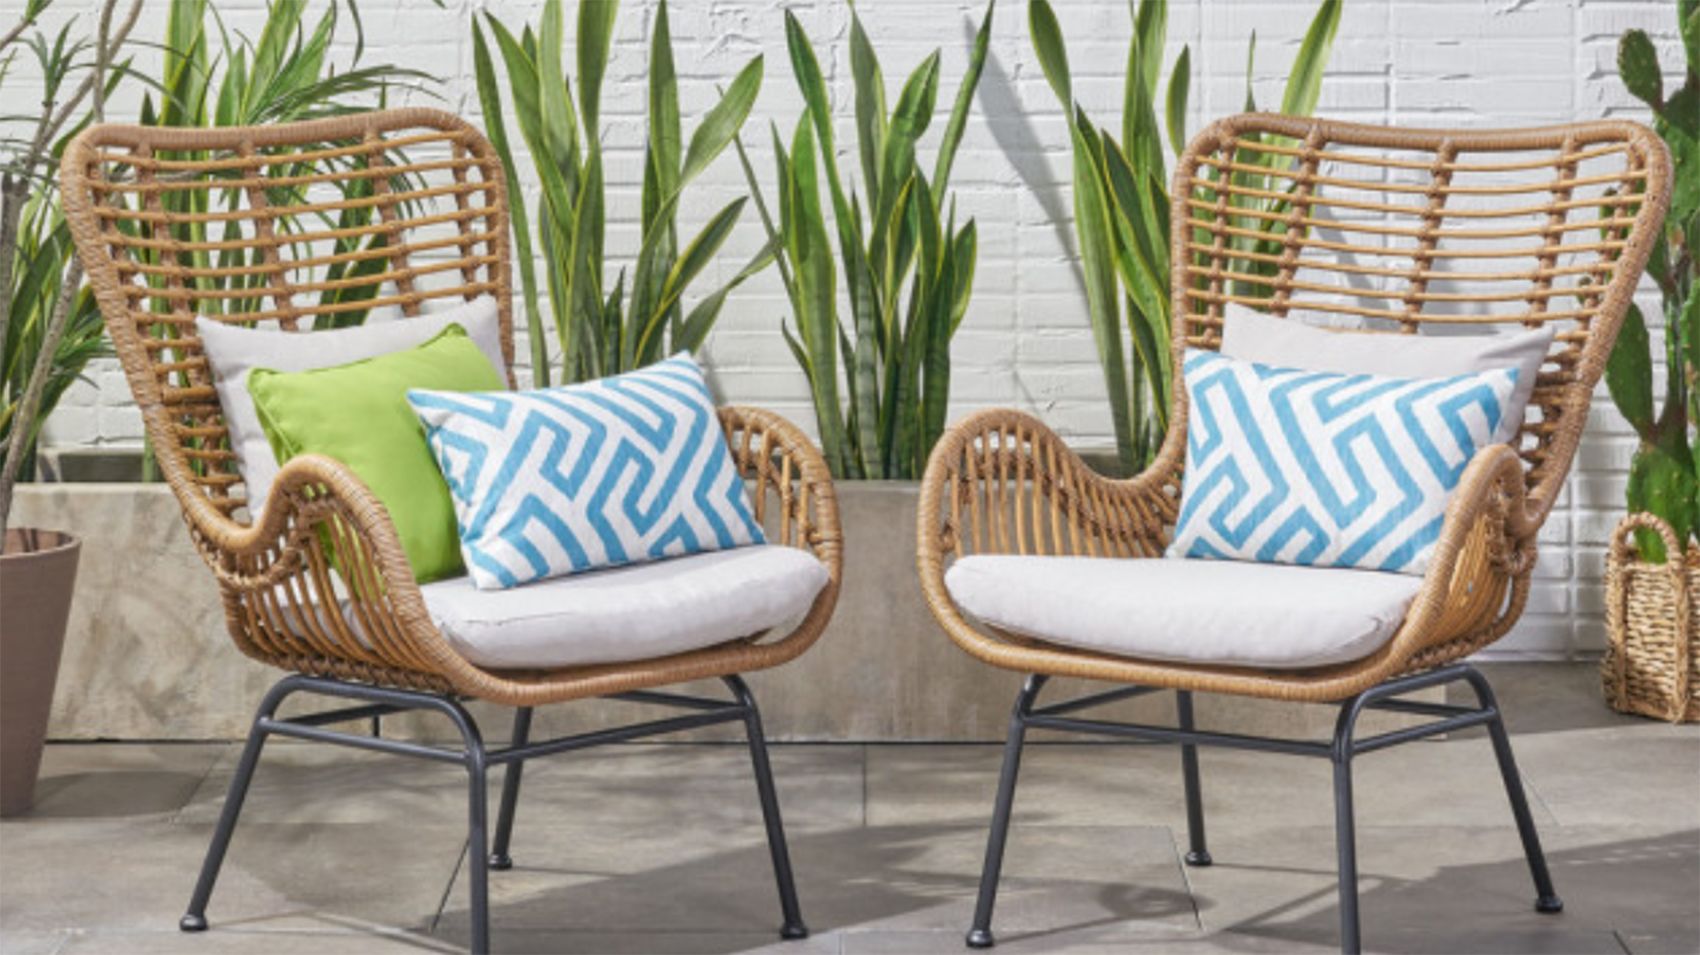 4-Piece Rattan Patio Furniture Sets, Wicker Bistro Patio Set with Ottoman,  Glass Coffee Table, Outdoor Cushioned PE Rattan Wicker Sectional Sofa Set,  Dining Table Sets for Backyard, Q12548 - Walmart.com